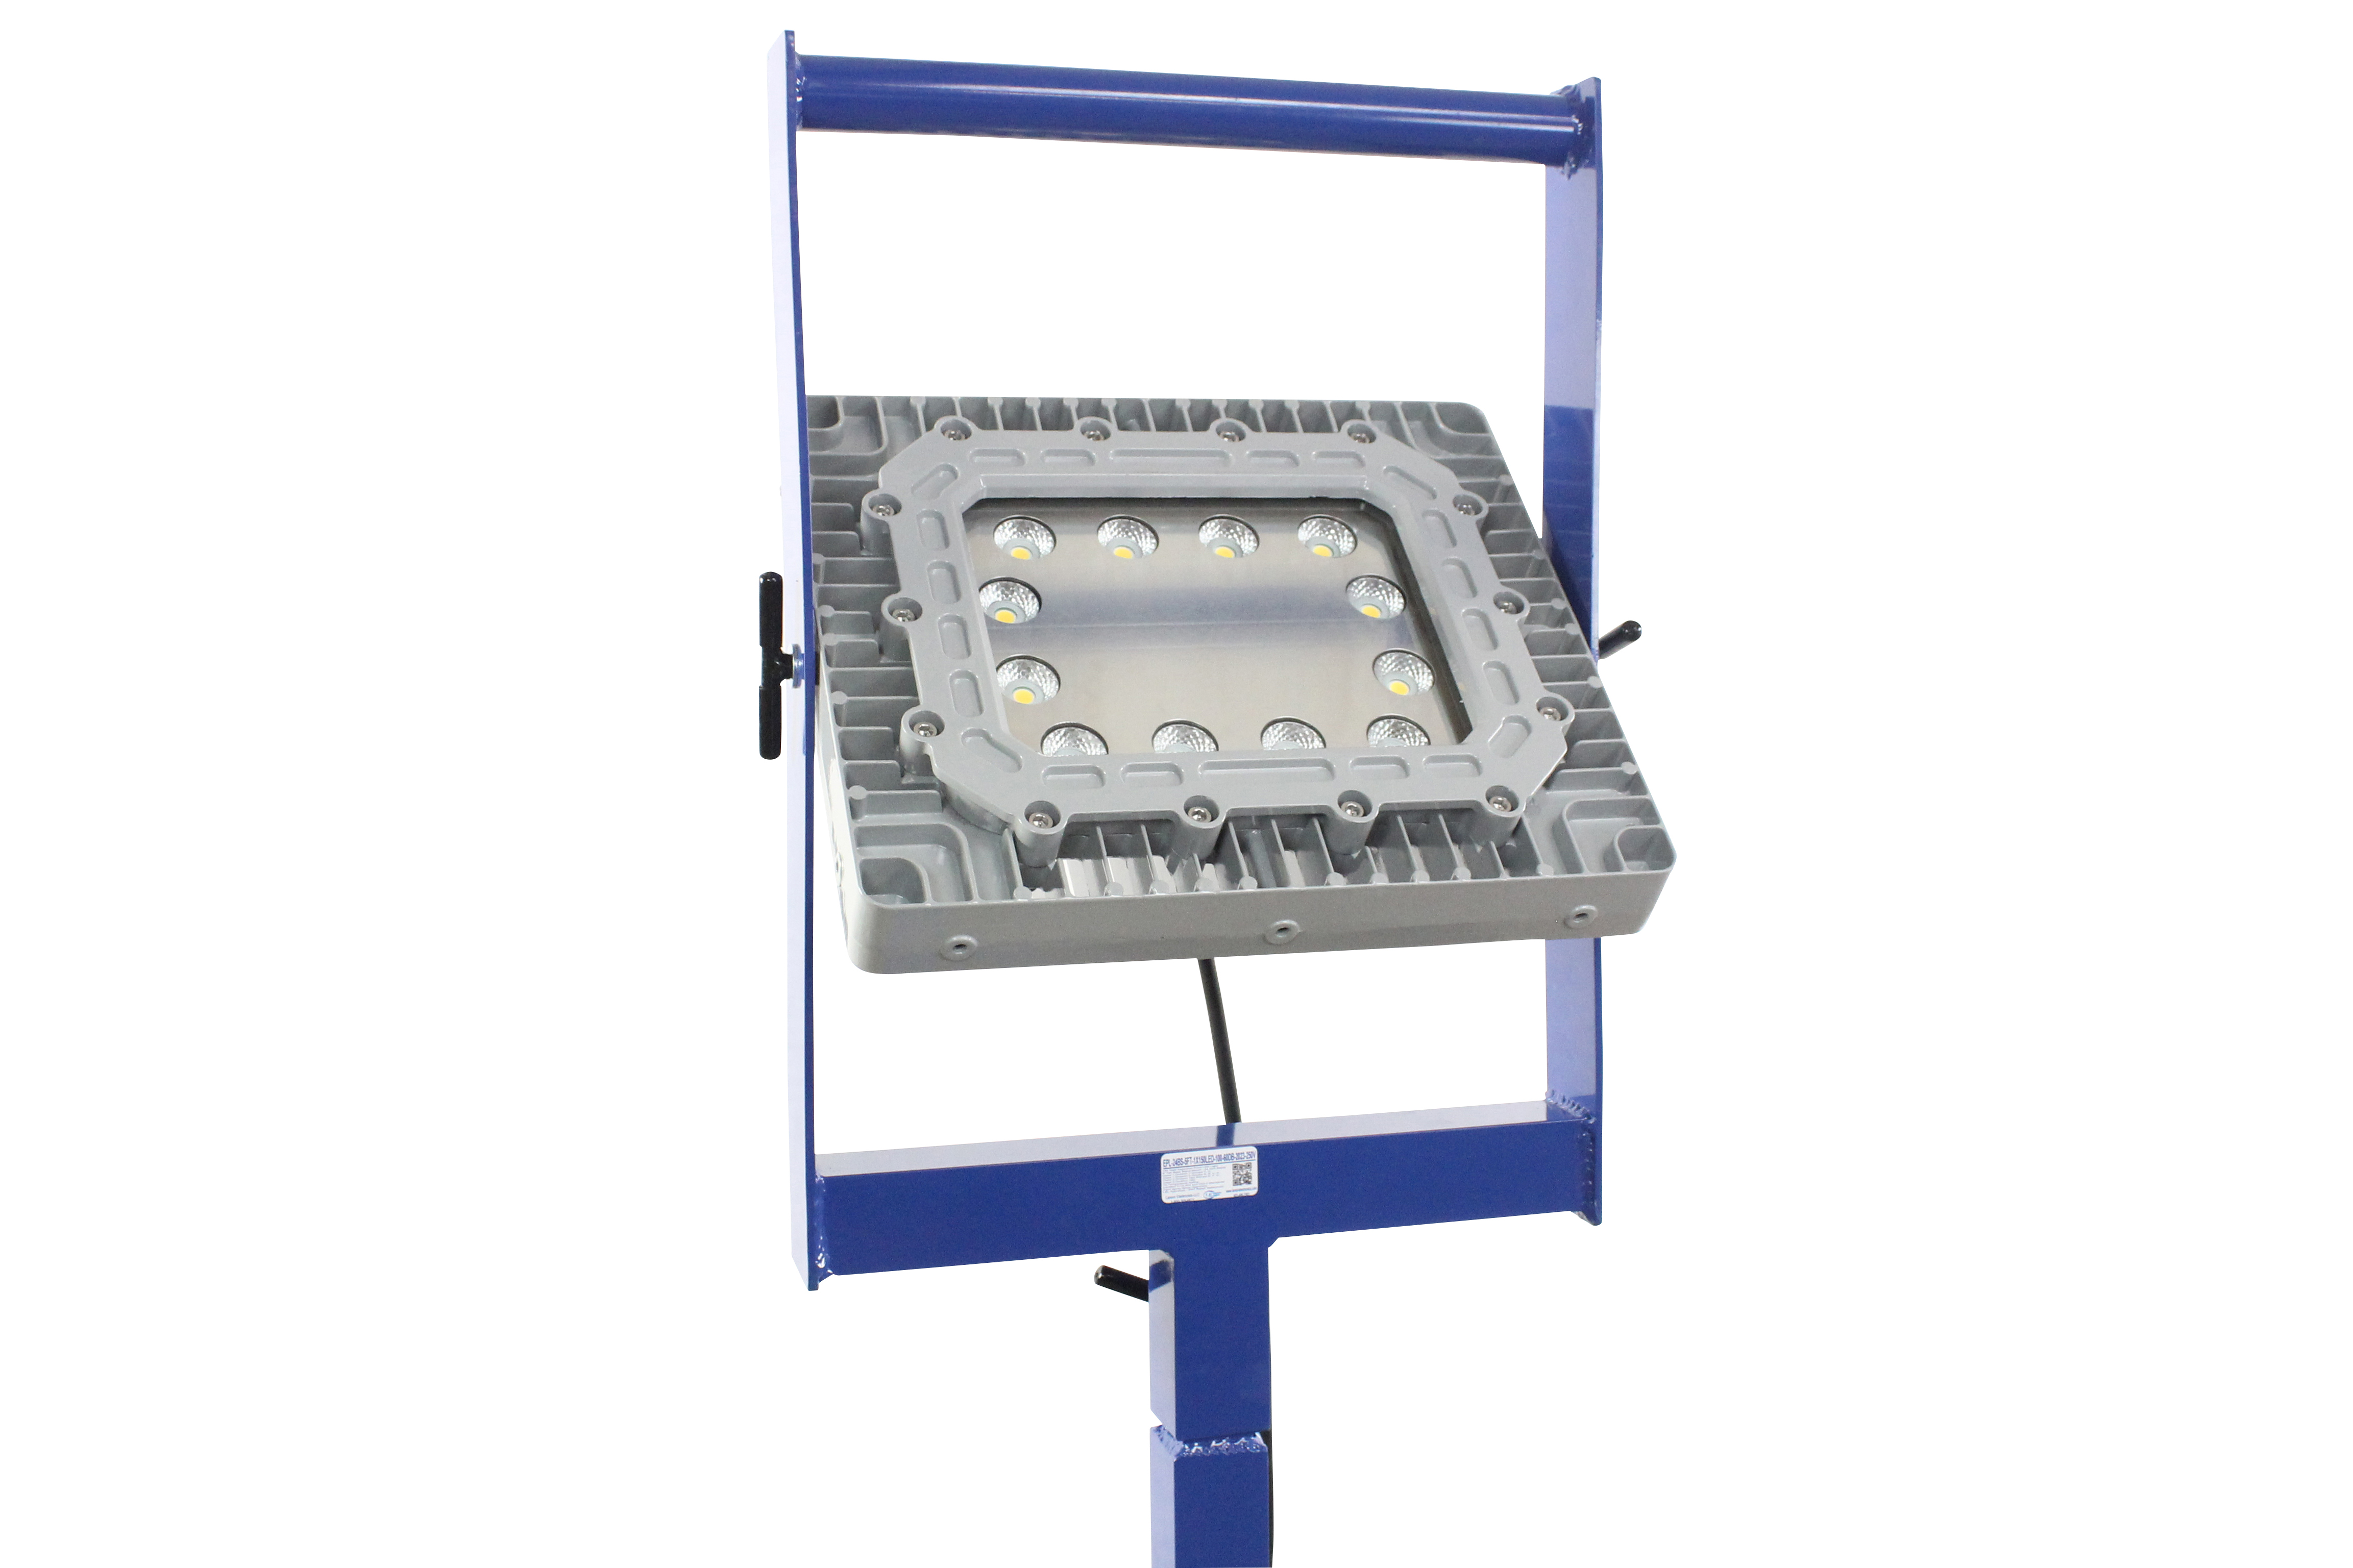 Class 1 Division 1 LED Work Light on Base Stand with 200' Cord